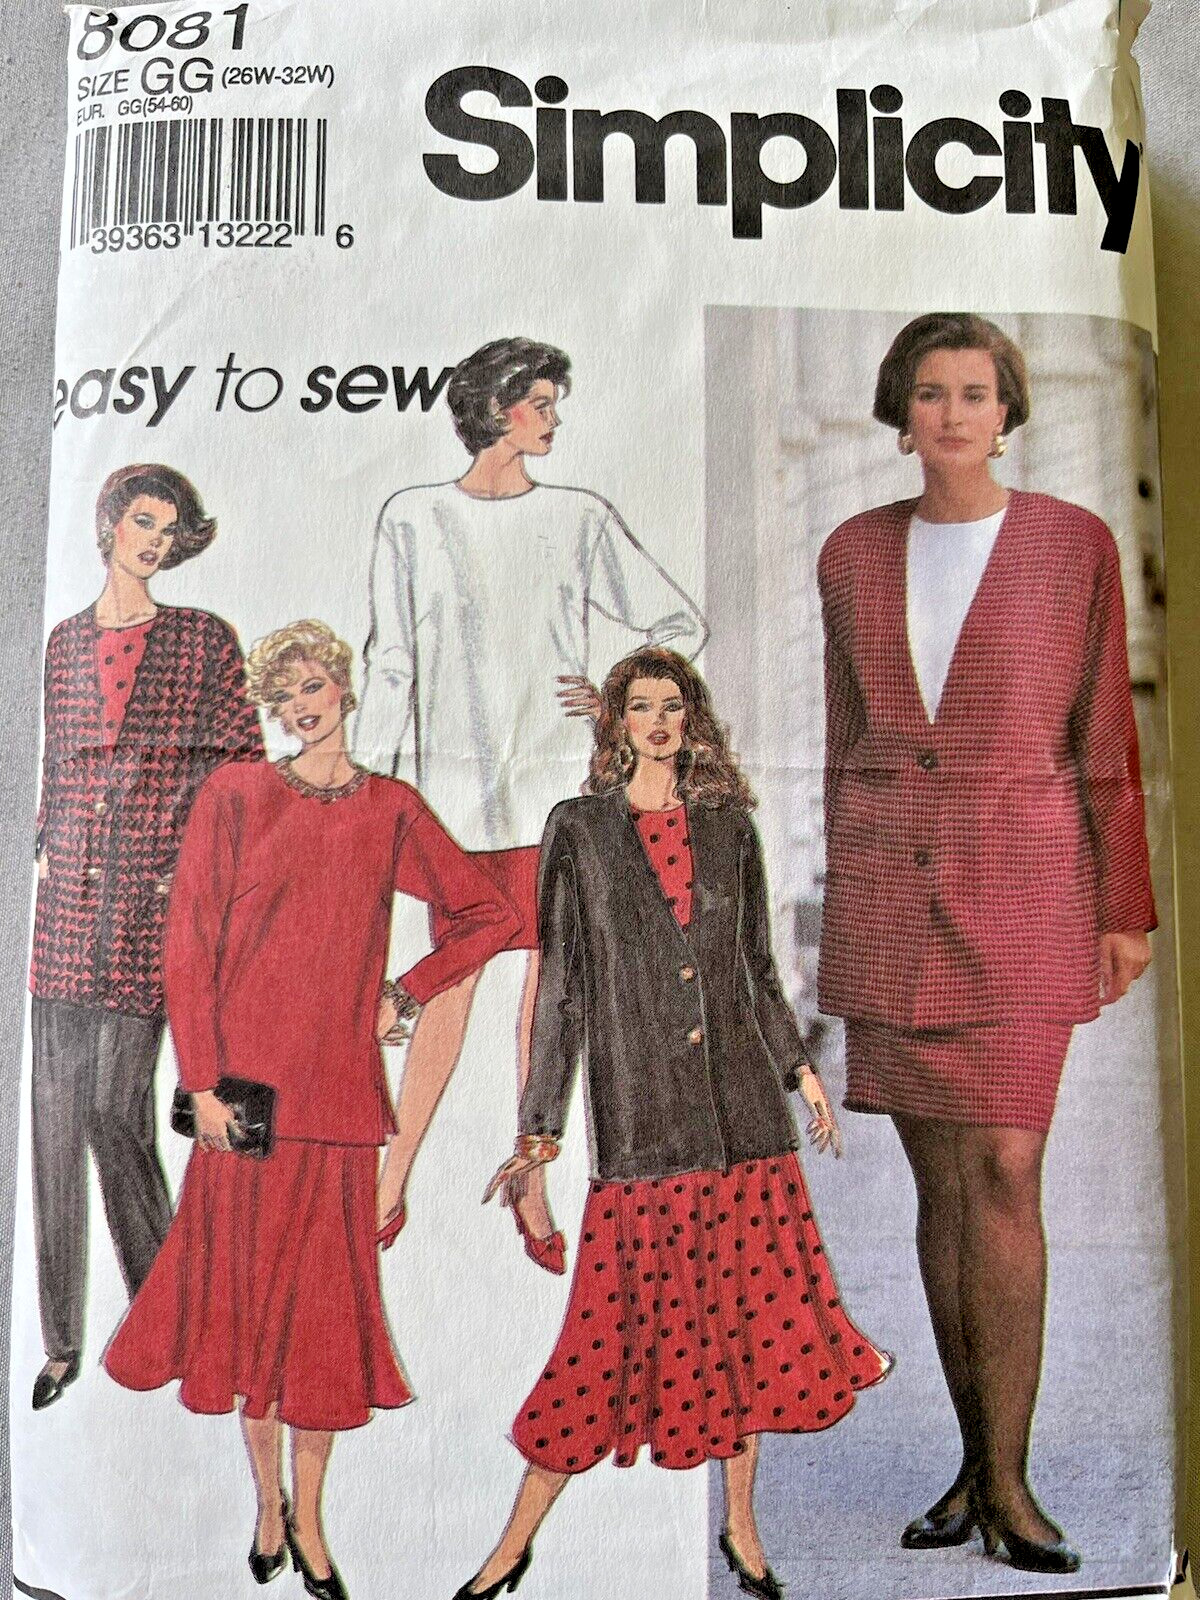 Simplicity Easy to Sew 8081 Pants Top Jacket Skirt 2 Style Size GG 26W-32W Uncut